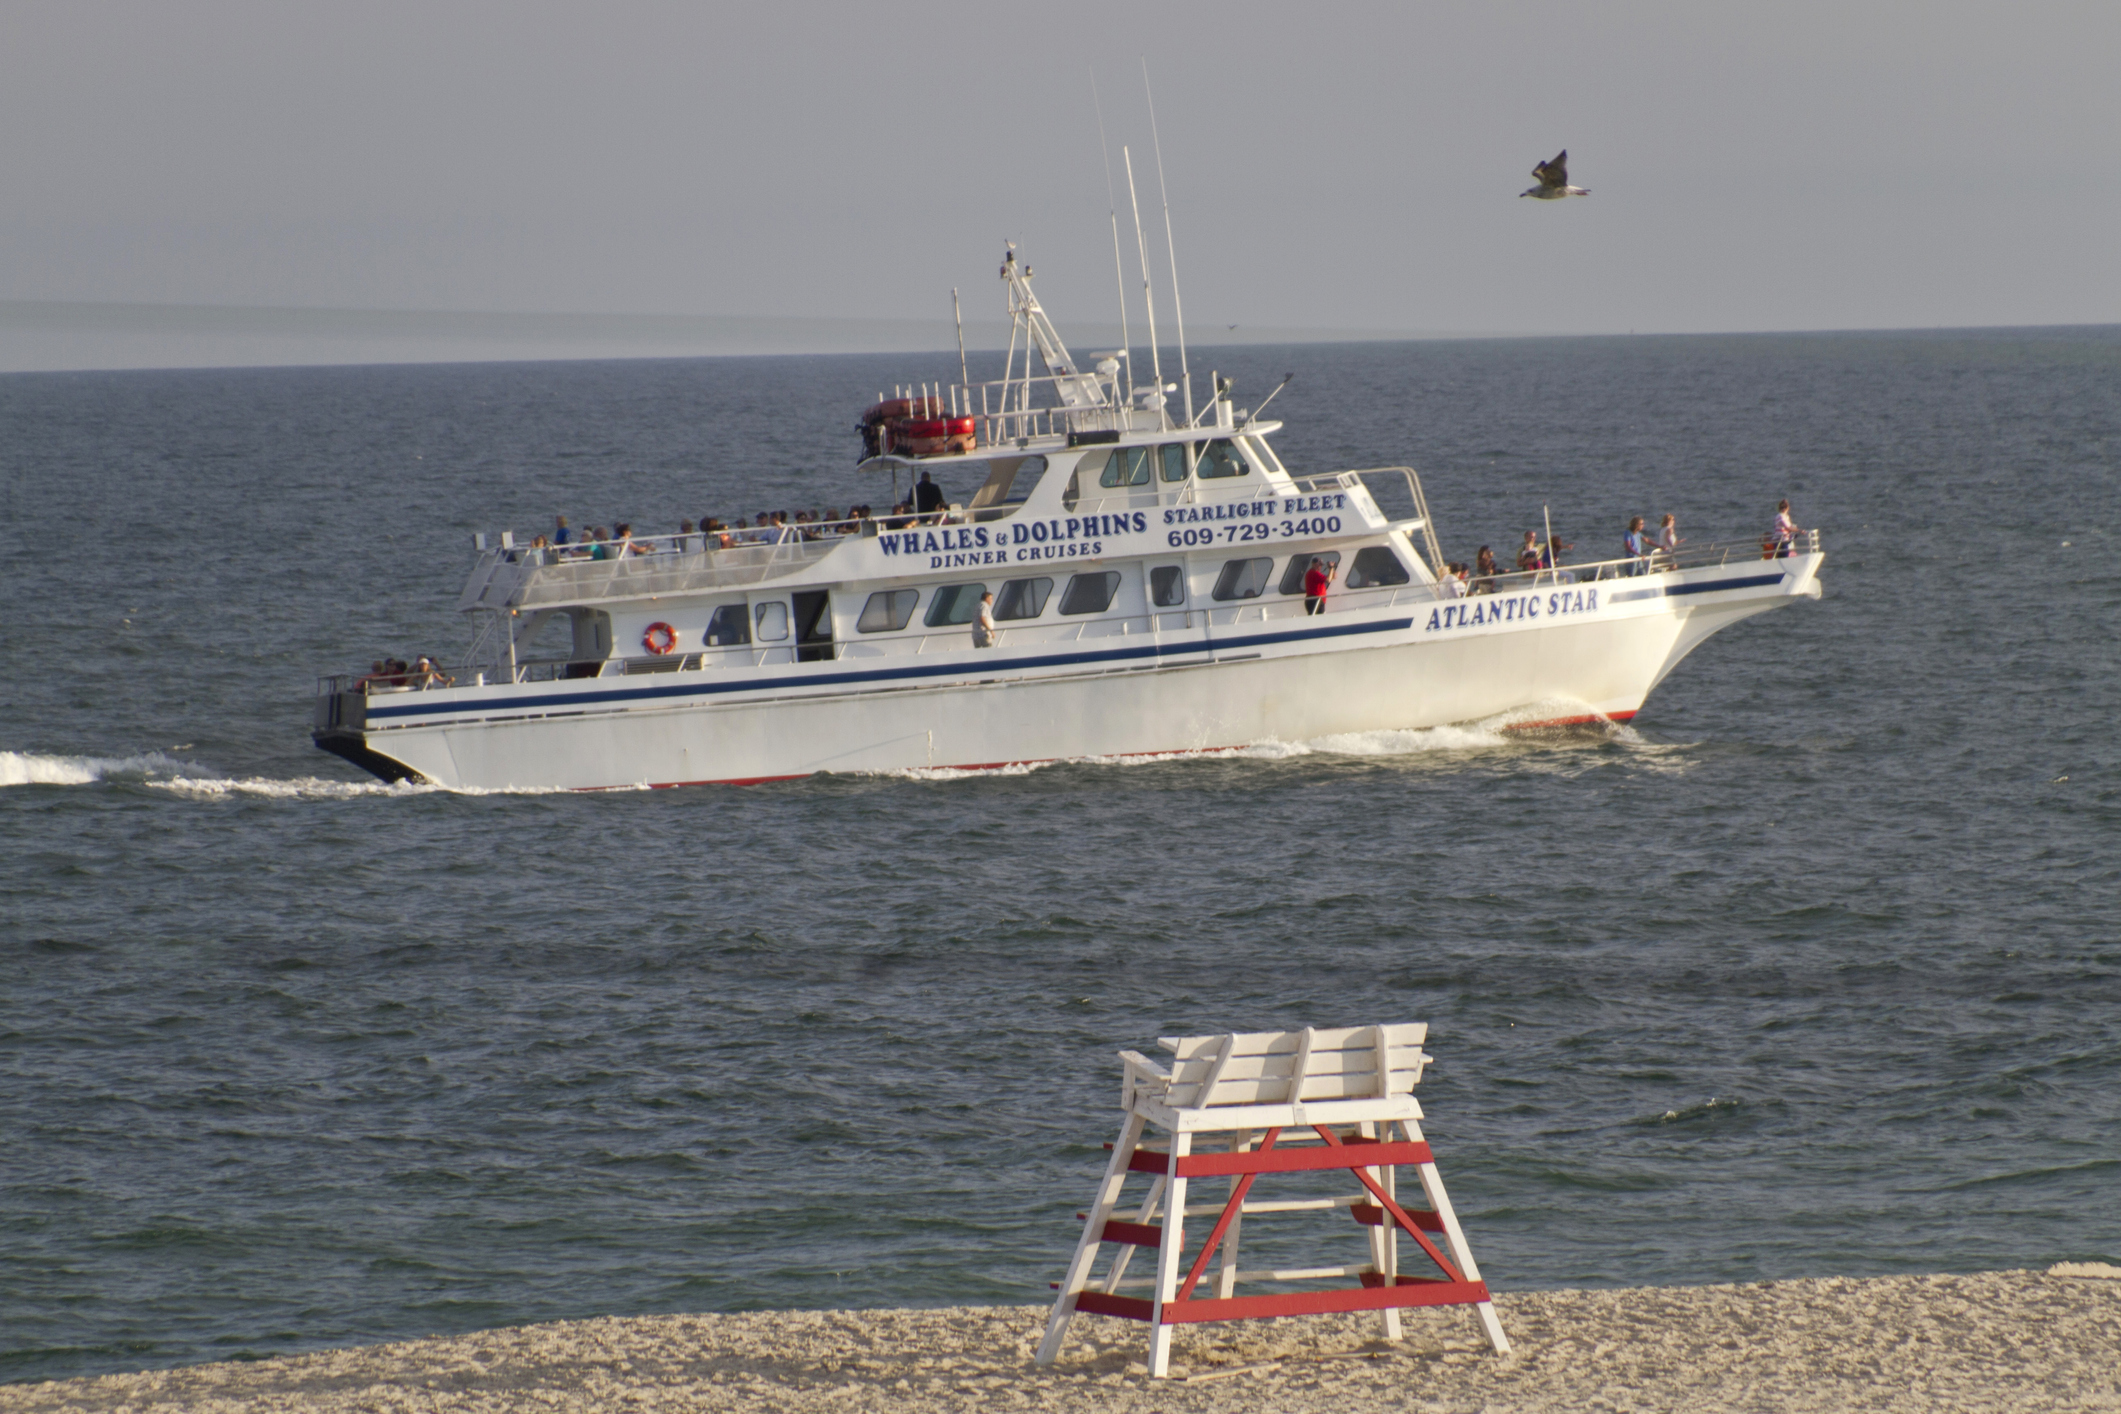 Cape May, New Jersey, USA - Septmember 4, 2014: A boat carrying tourists out on the ocean to see dolphins and whales passes by a lifeguard stand as a seagull flies past on September 4, 2014 on the beach of Cape May